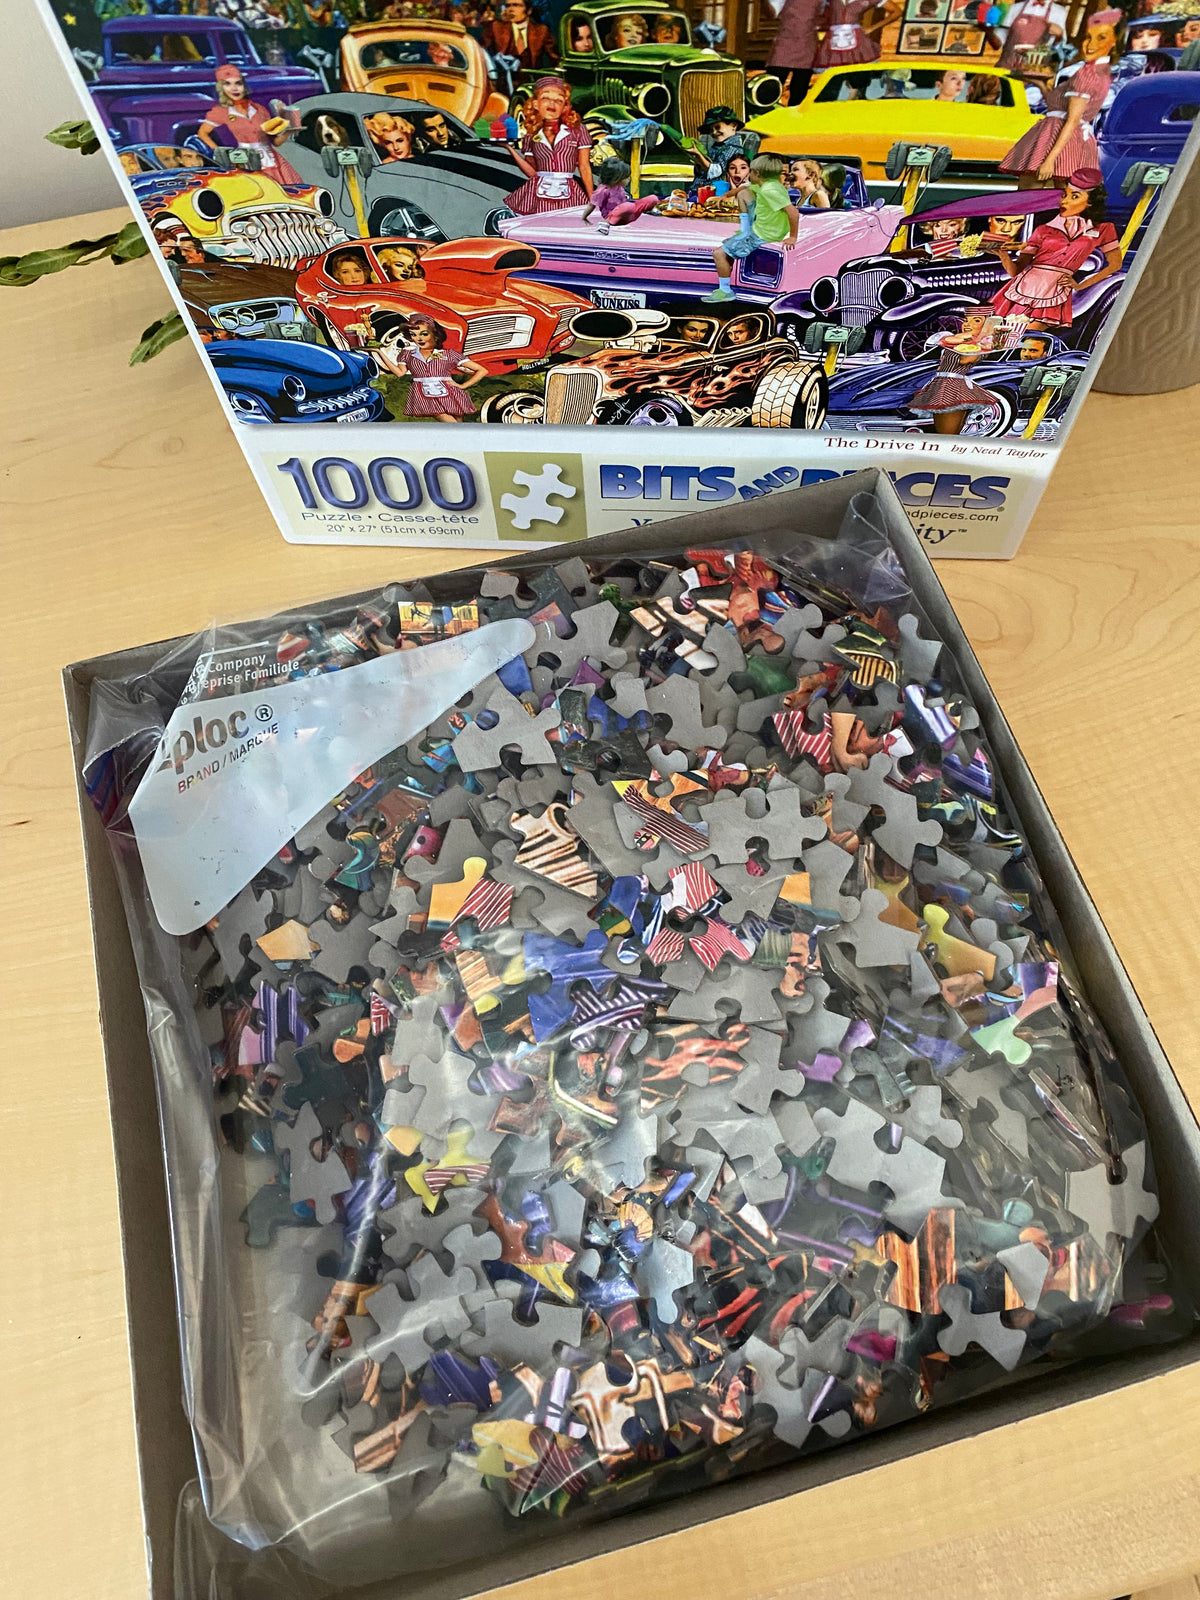 THE DRIVE IN PUZZLE